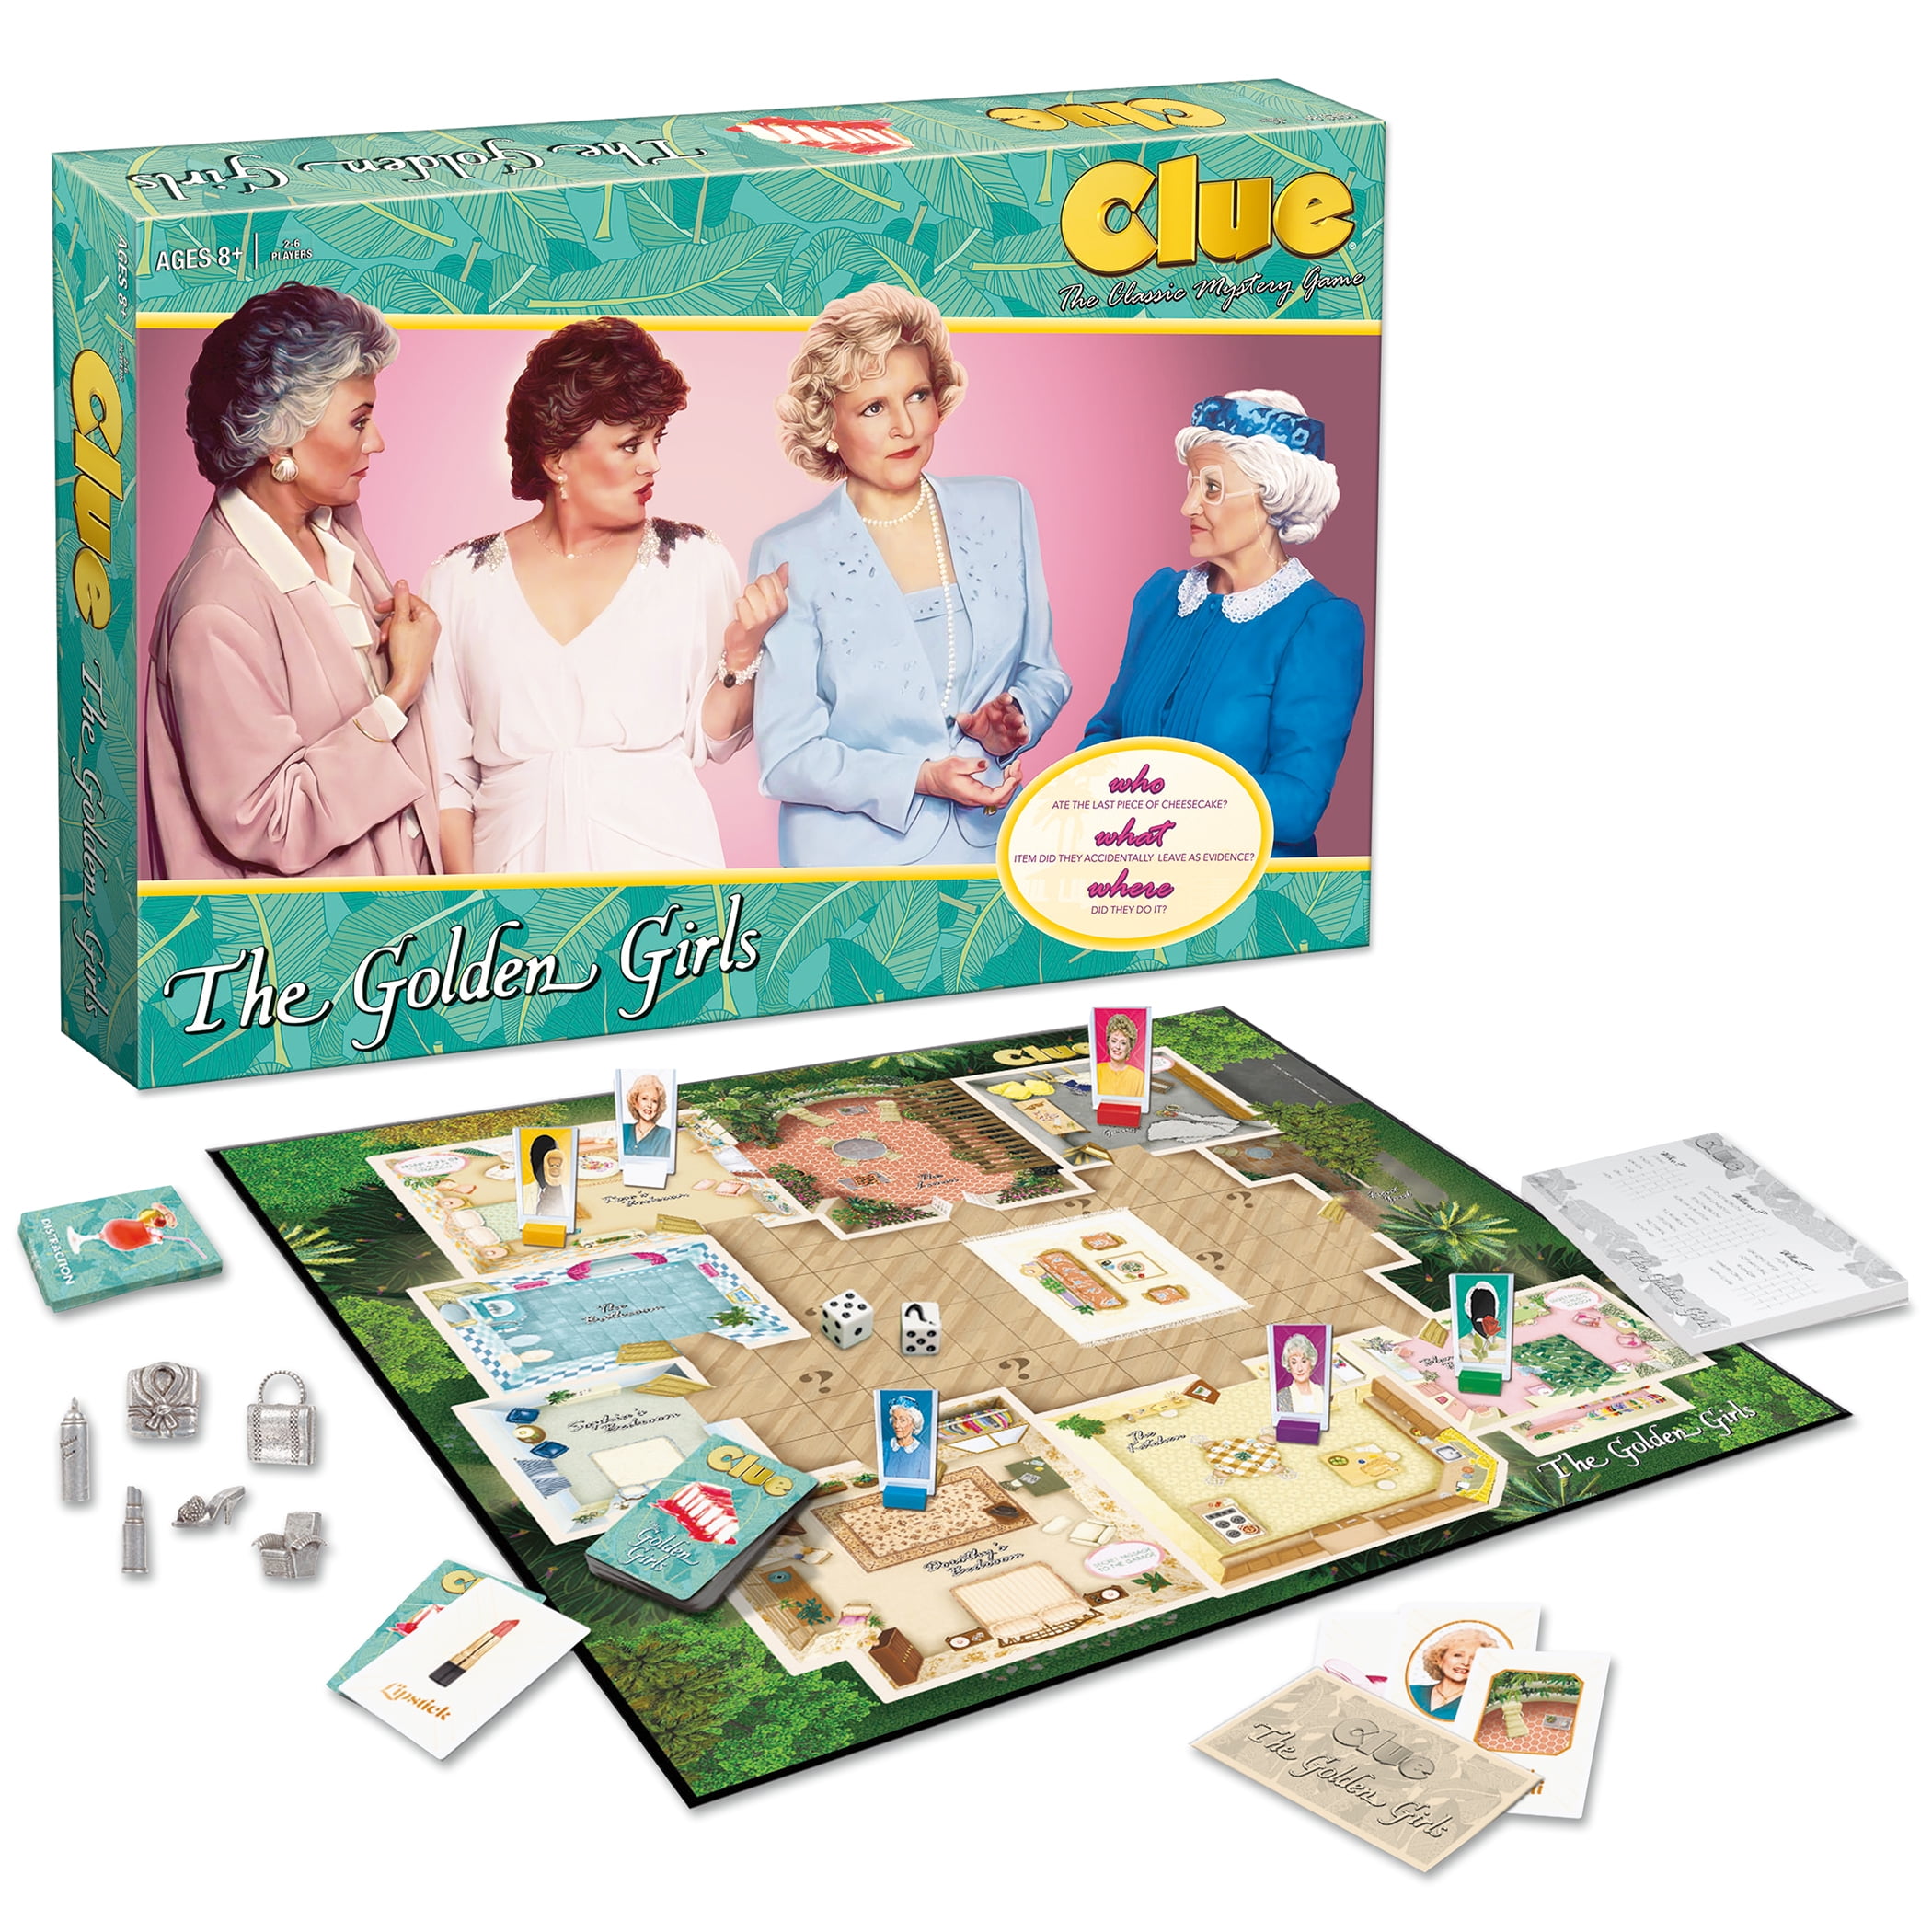 CLUE: Riverdale Board Game Themed Clue Game Official Riverdale Merchandise Artwork from Riverdale Seasons Features Popular Characters and Locations from The CW TV Show Riverdale